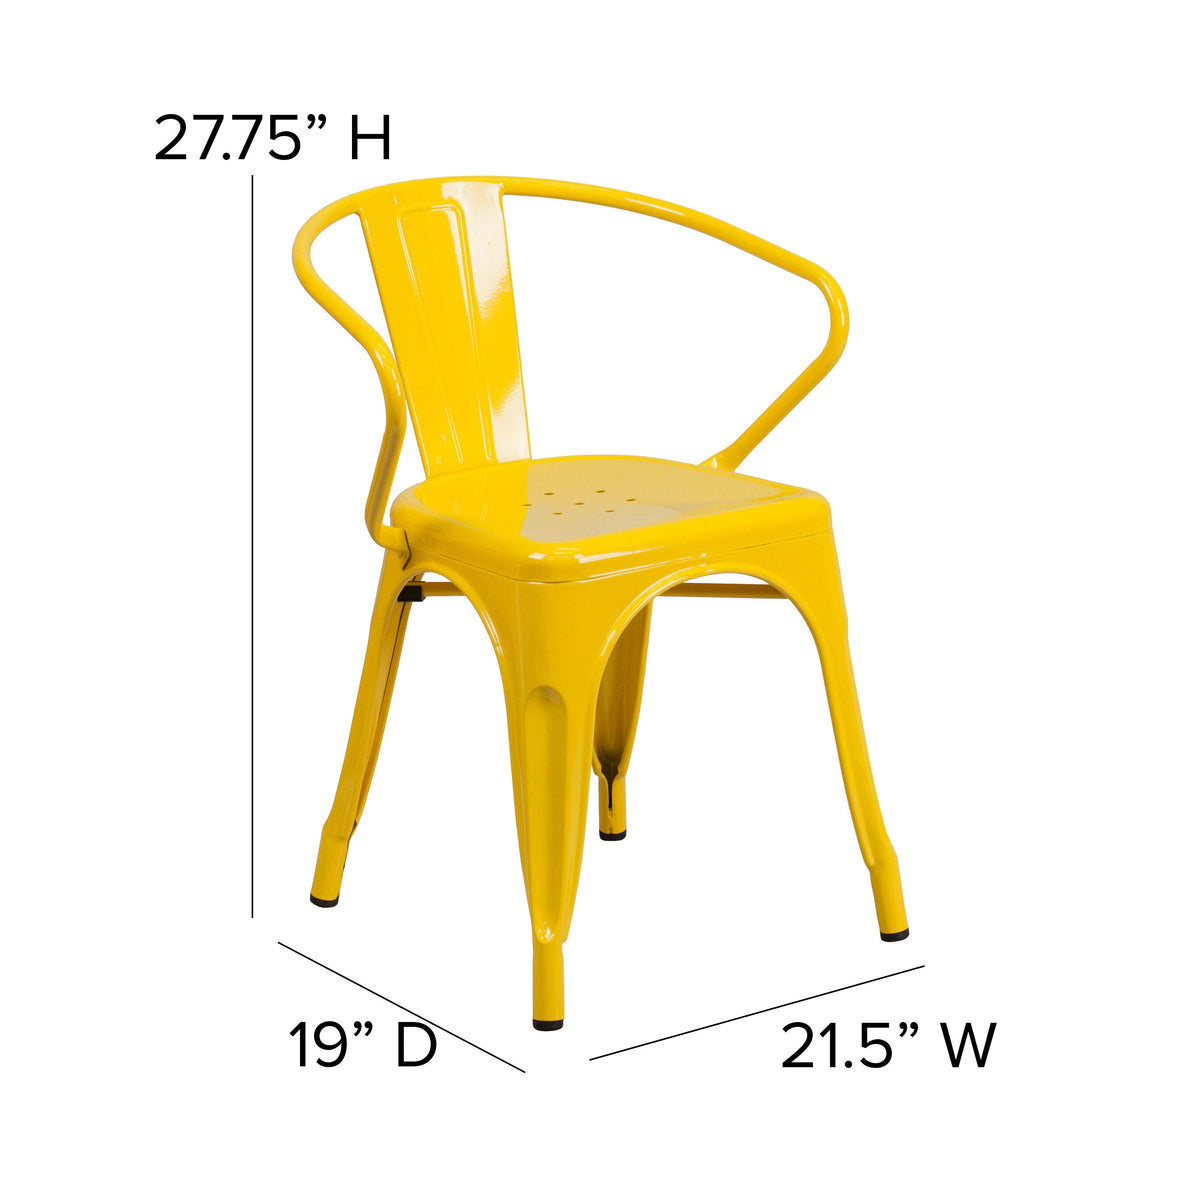 Yellow |#| Yellow Metal Indoor-Outdoor Chair with Arms - Restaurant Furniture